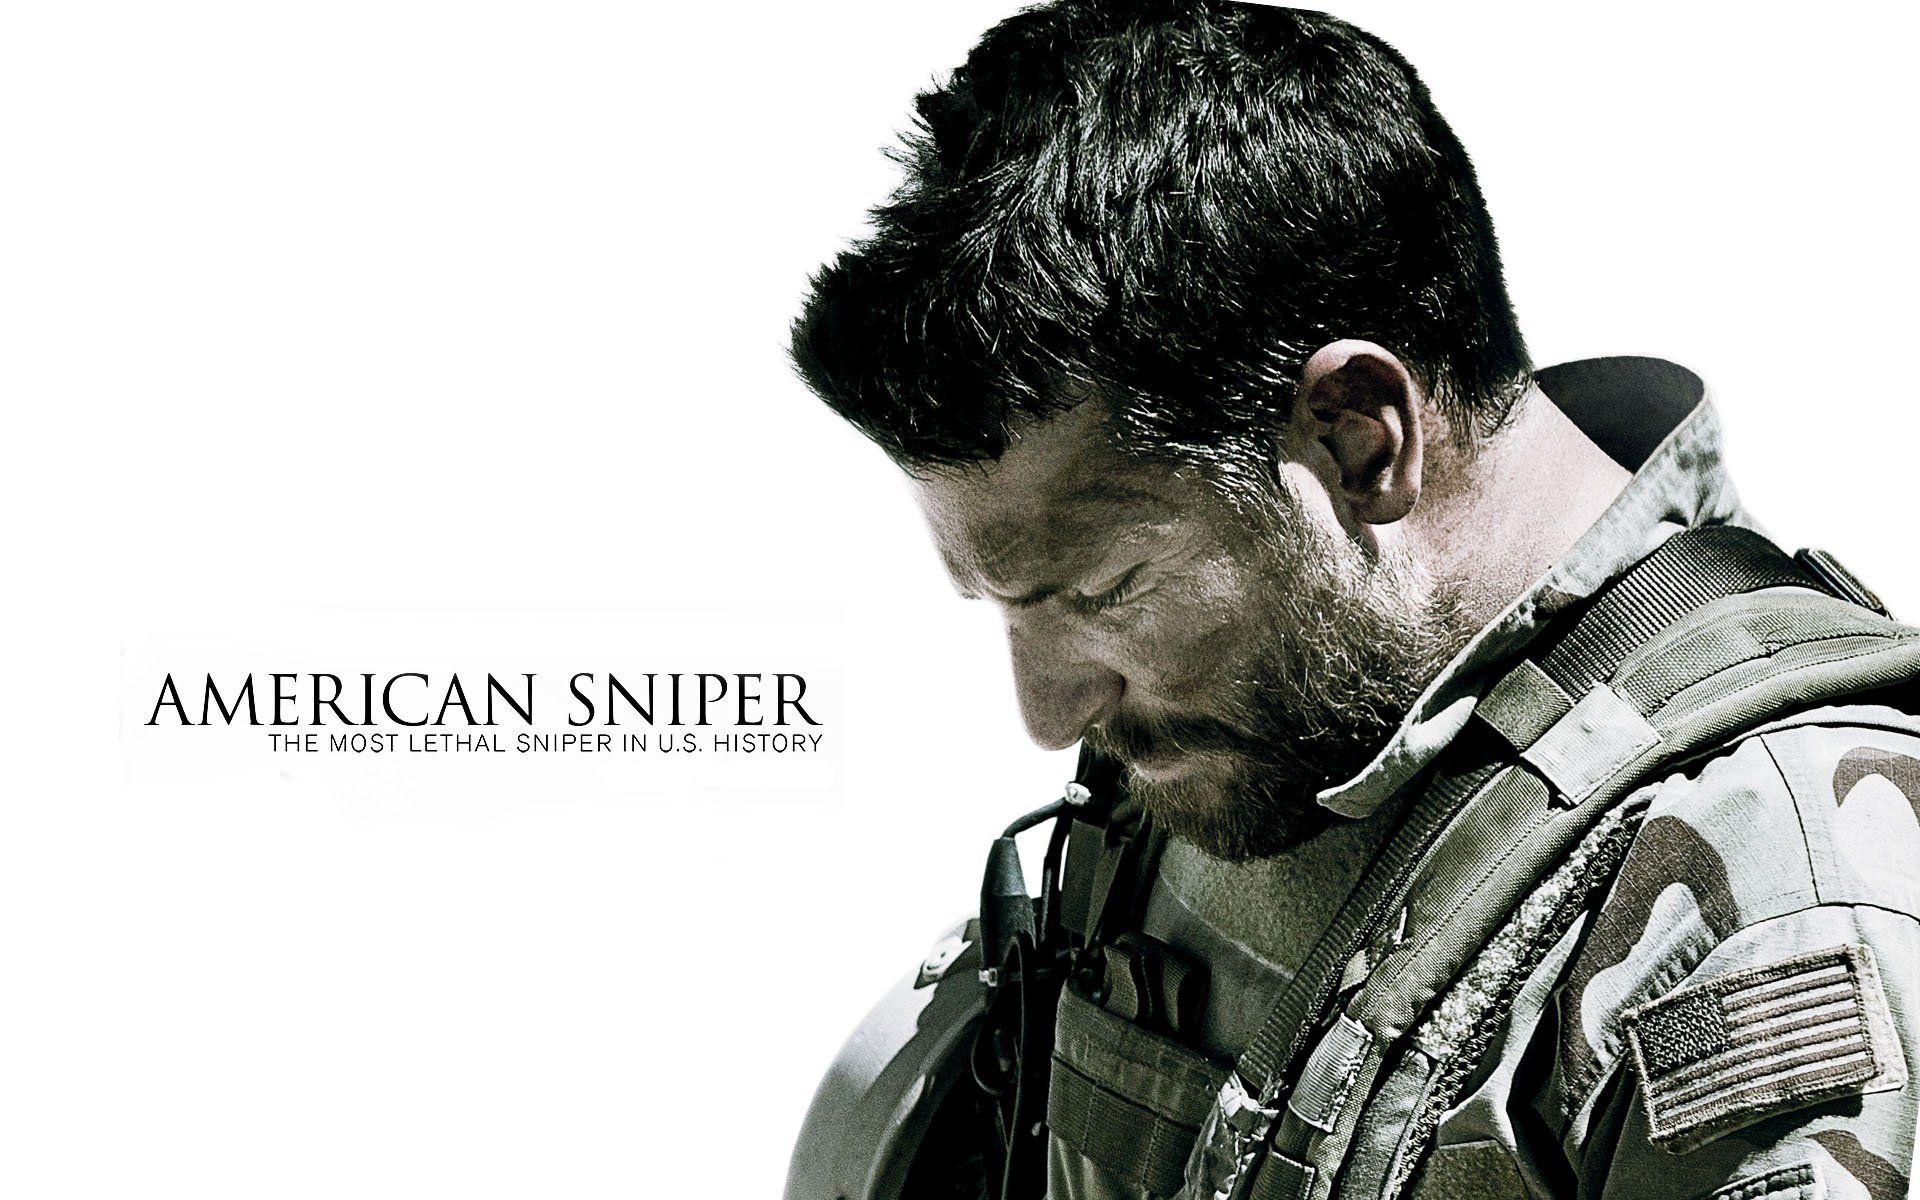 AMERICAN SNIPER biography action military warrior soldier